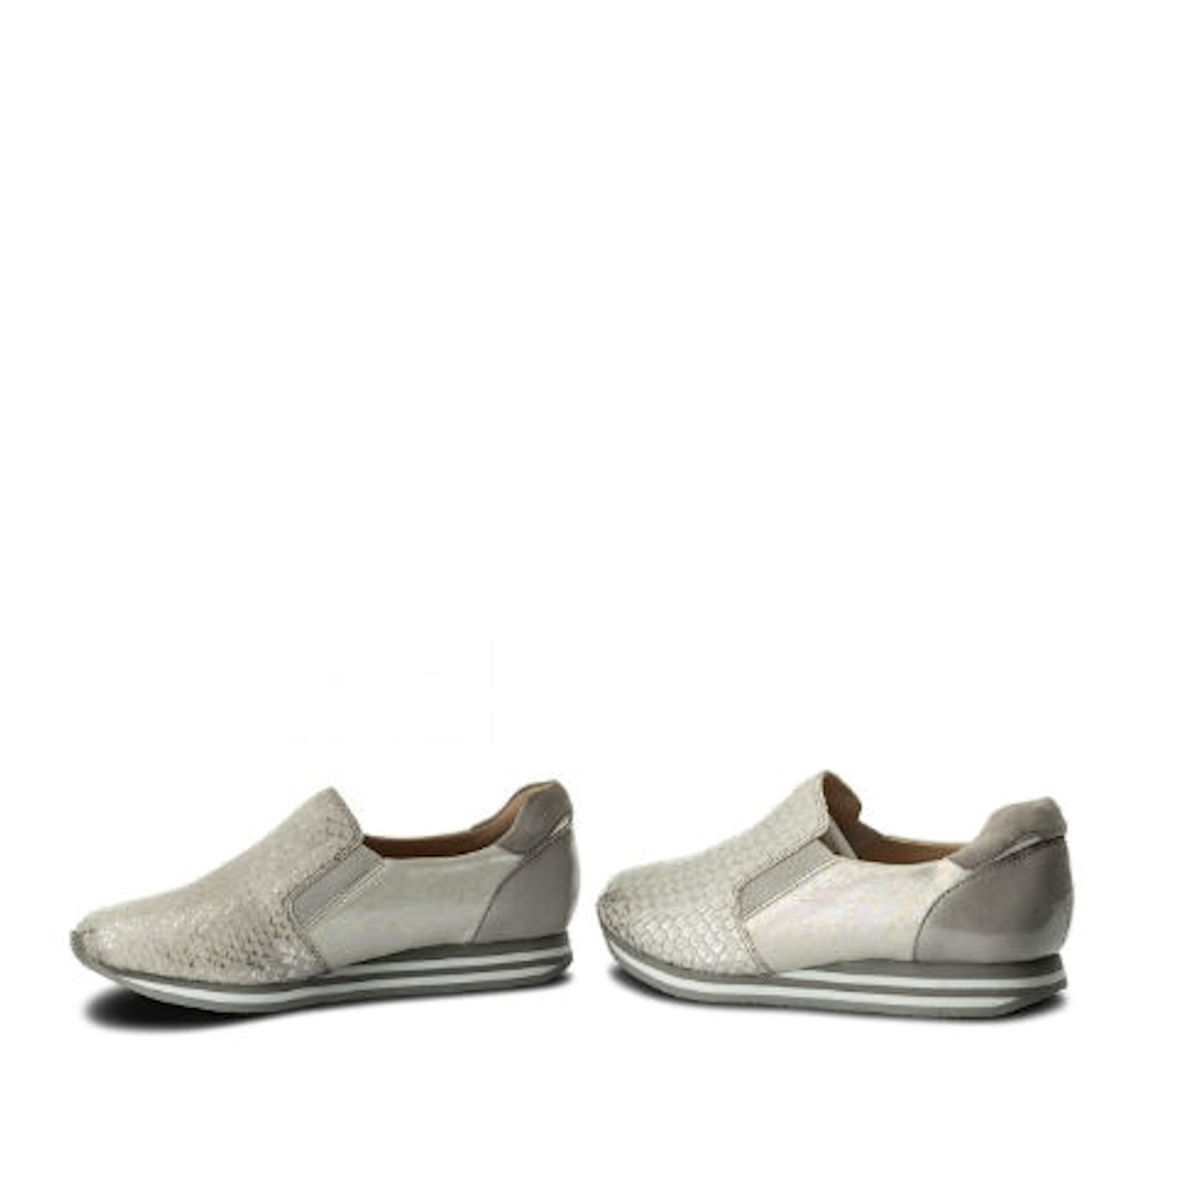 Caprice 9-24603-20 - Light Grey Leather Shoes